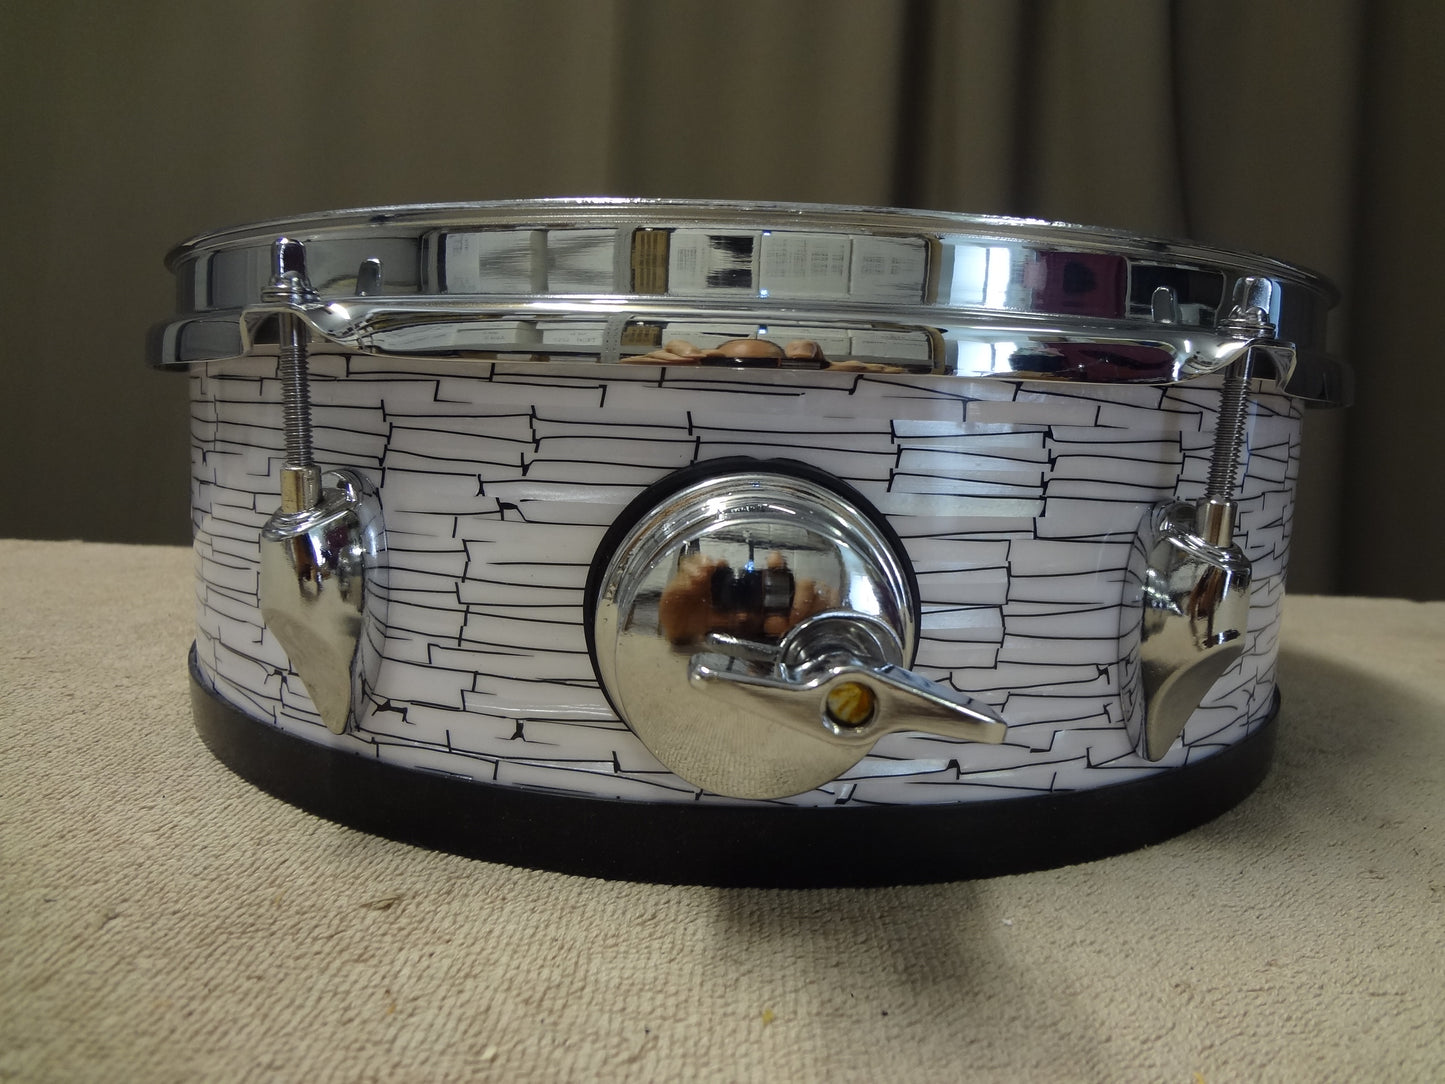 New 13 Inch Custom Electronic Snare Drum - White/Black Etch